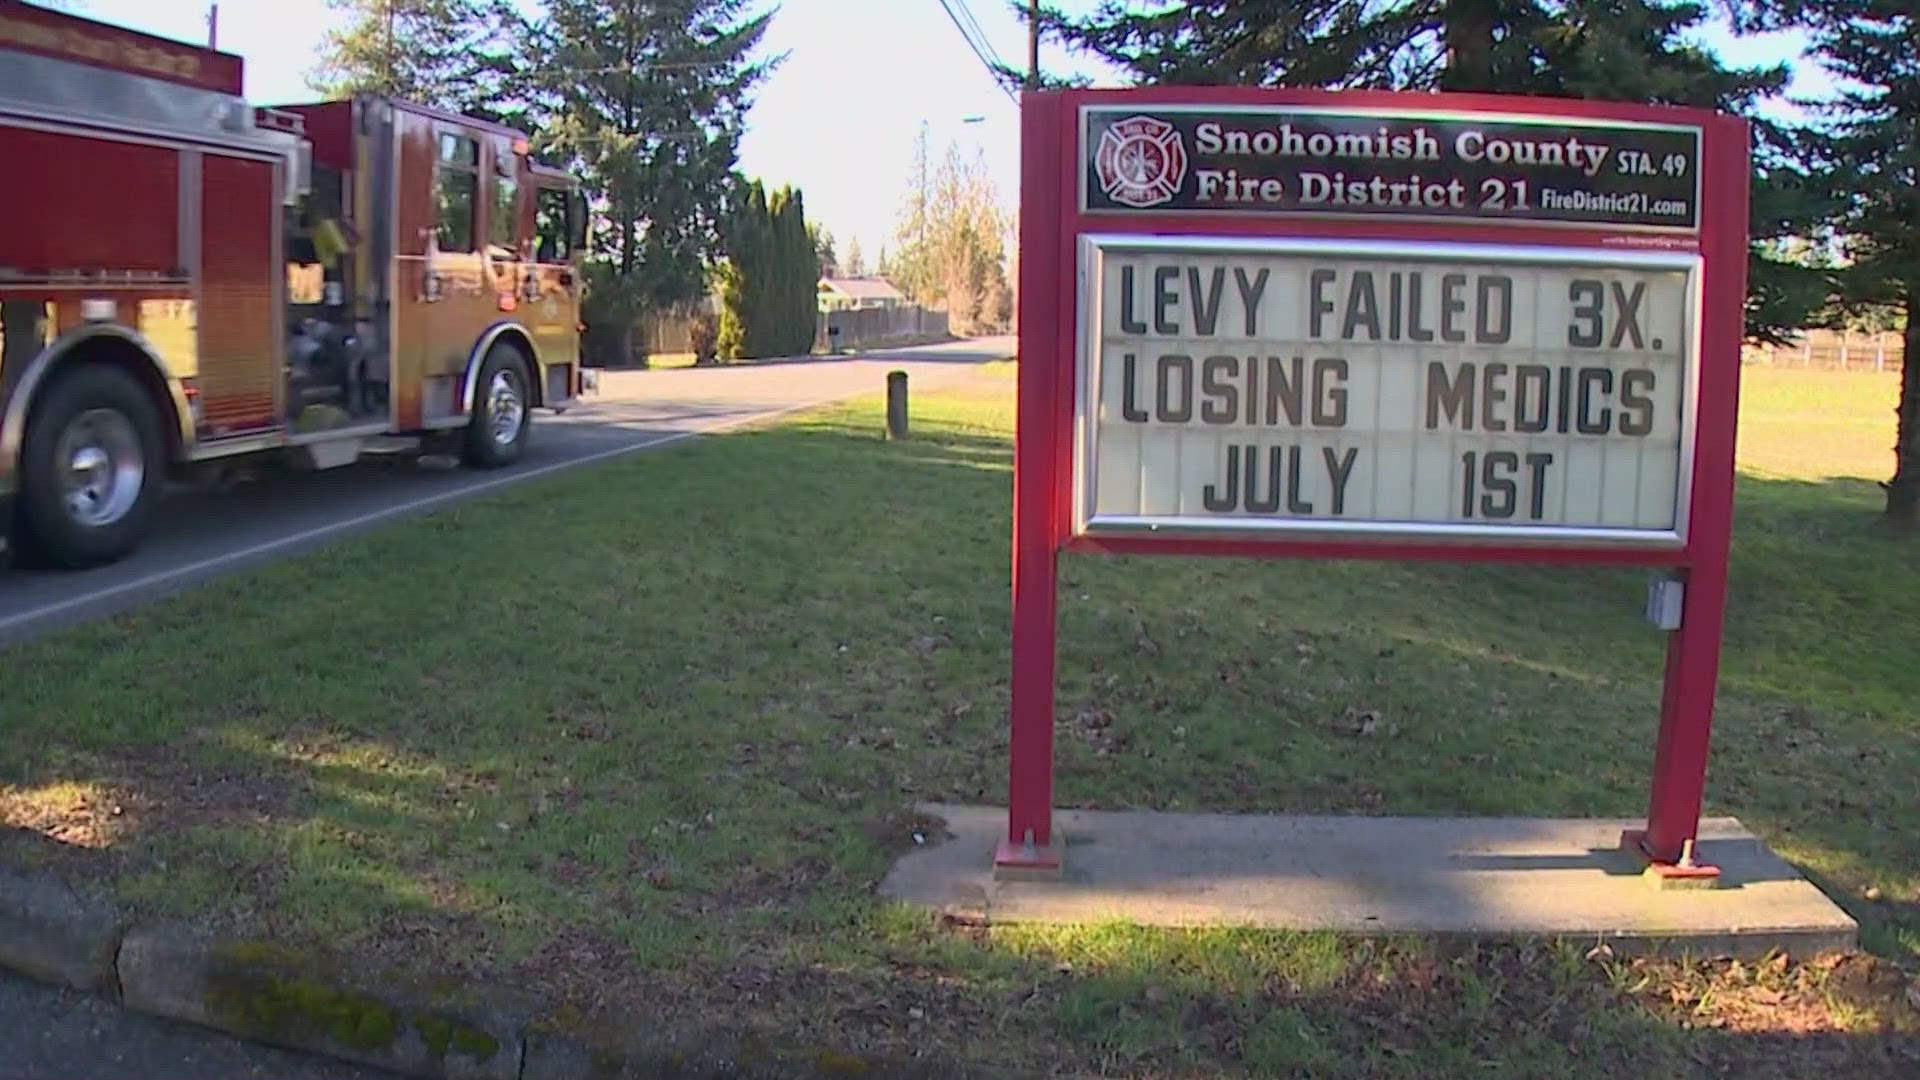 Snohomish County Fire District 21 faces the loss of two critically needed paramedics on July 1.